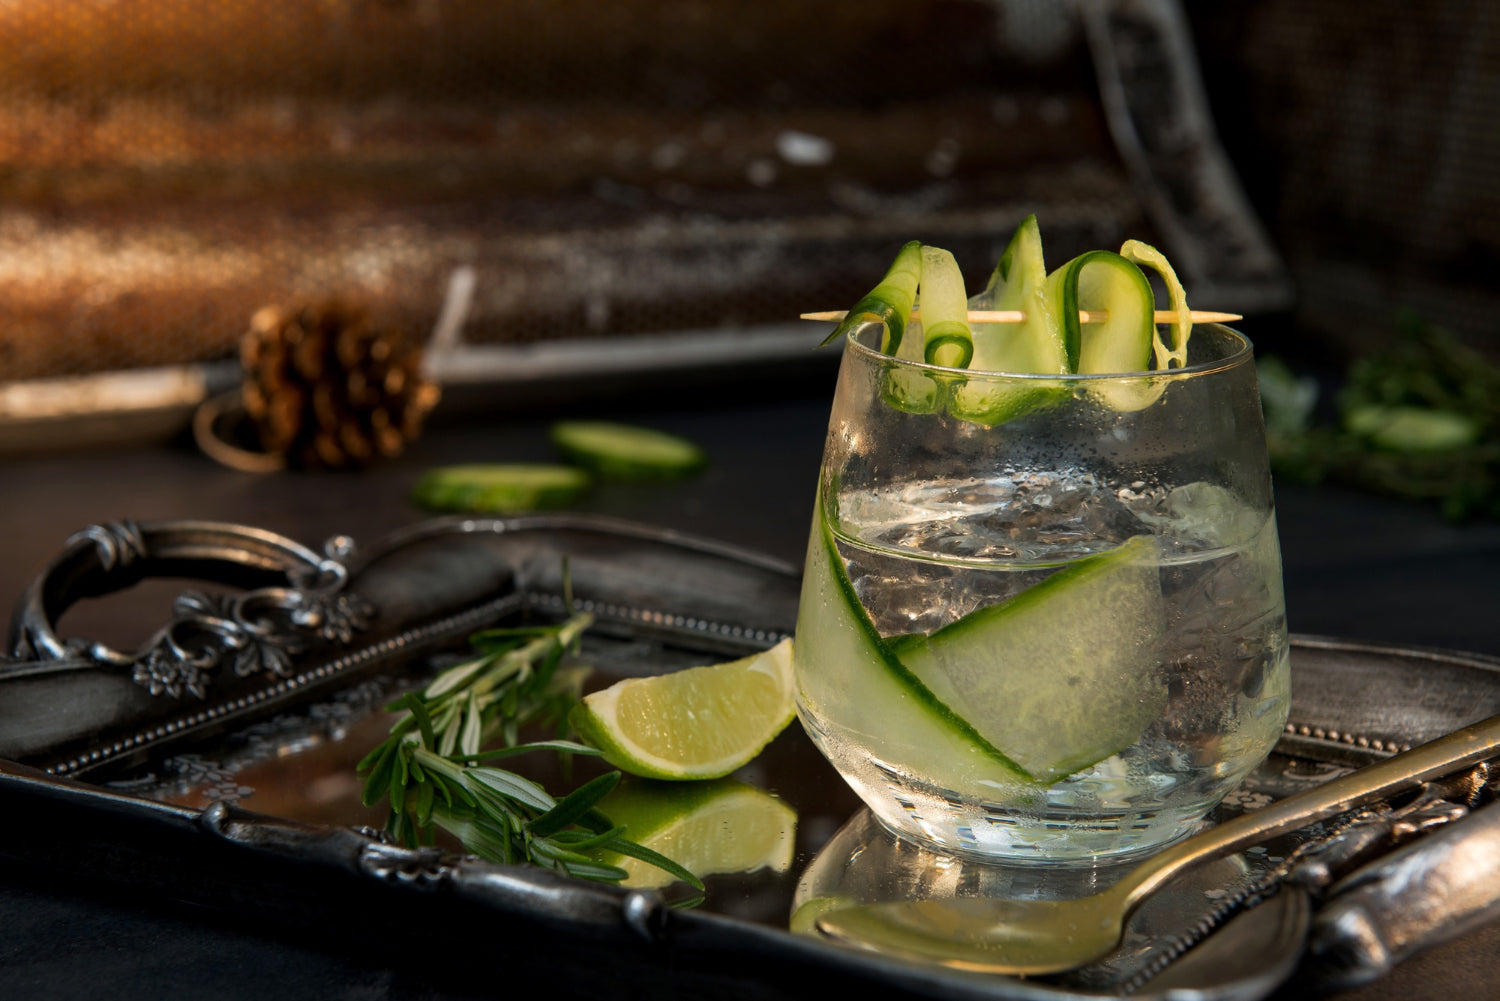 Hertford Gin and Tonic with Meraki Spirits with cucumber and lime